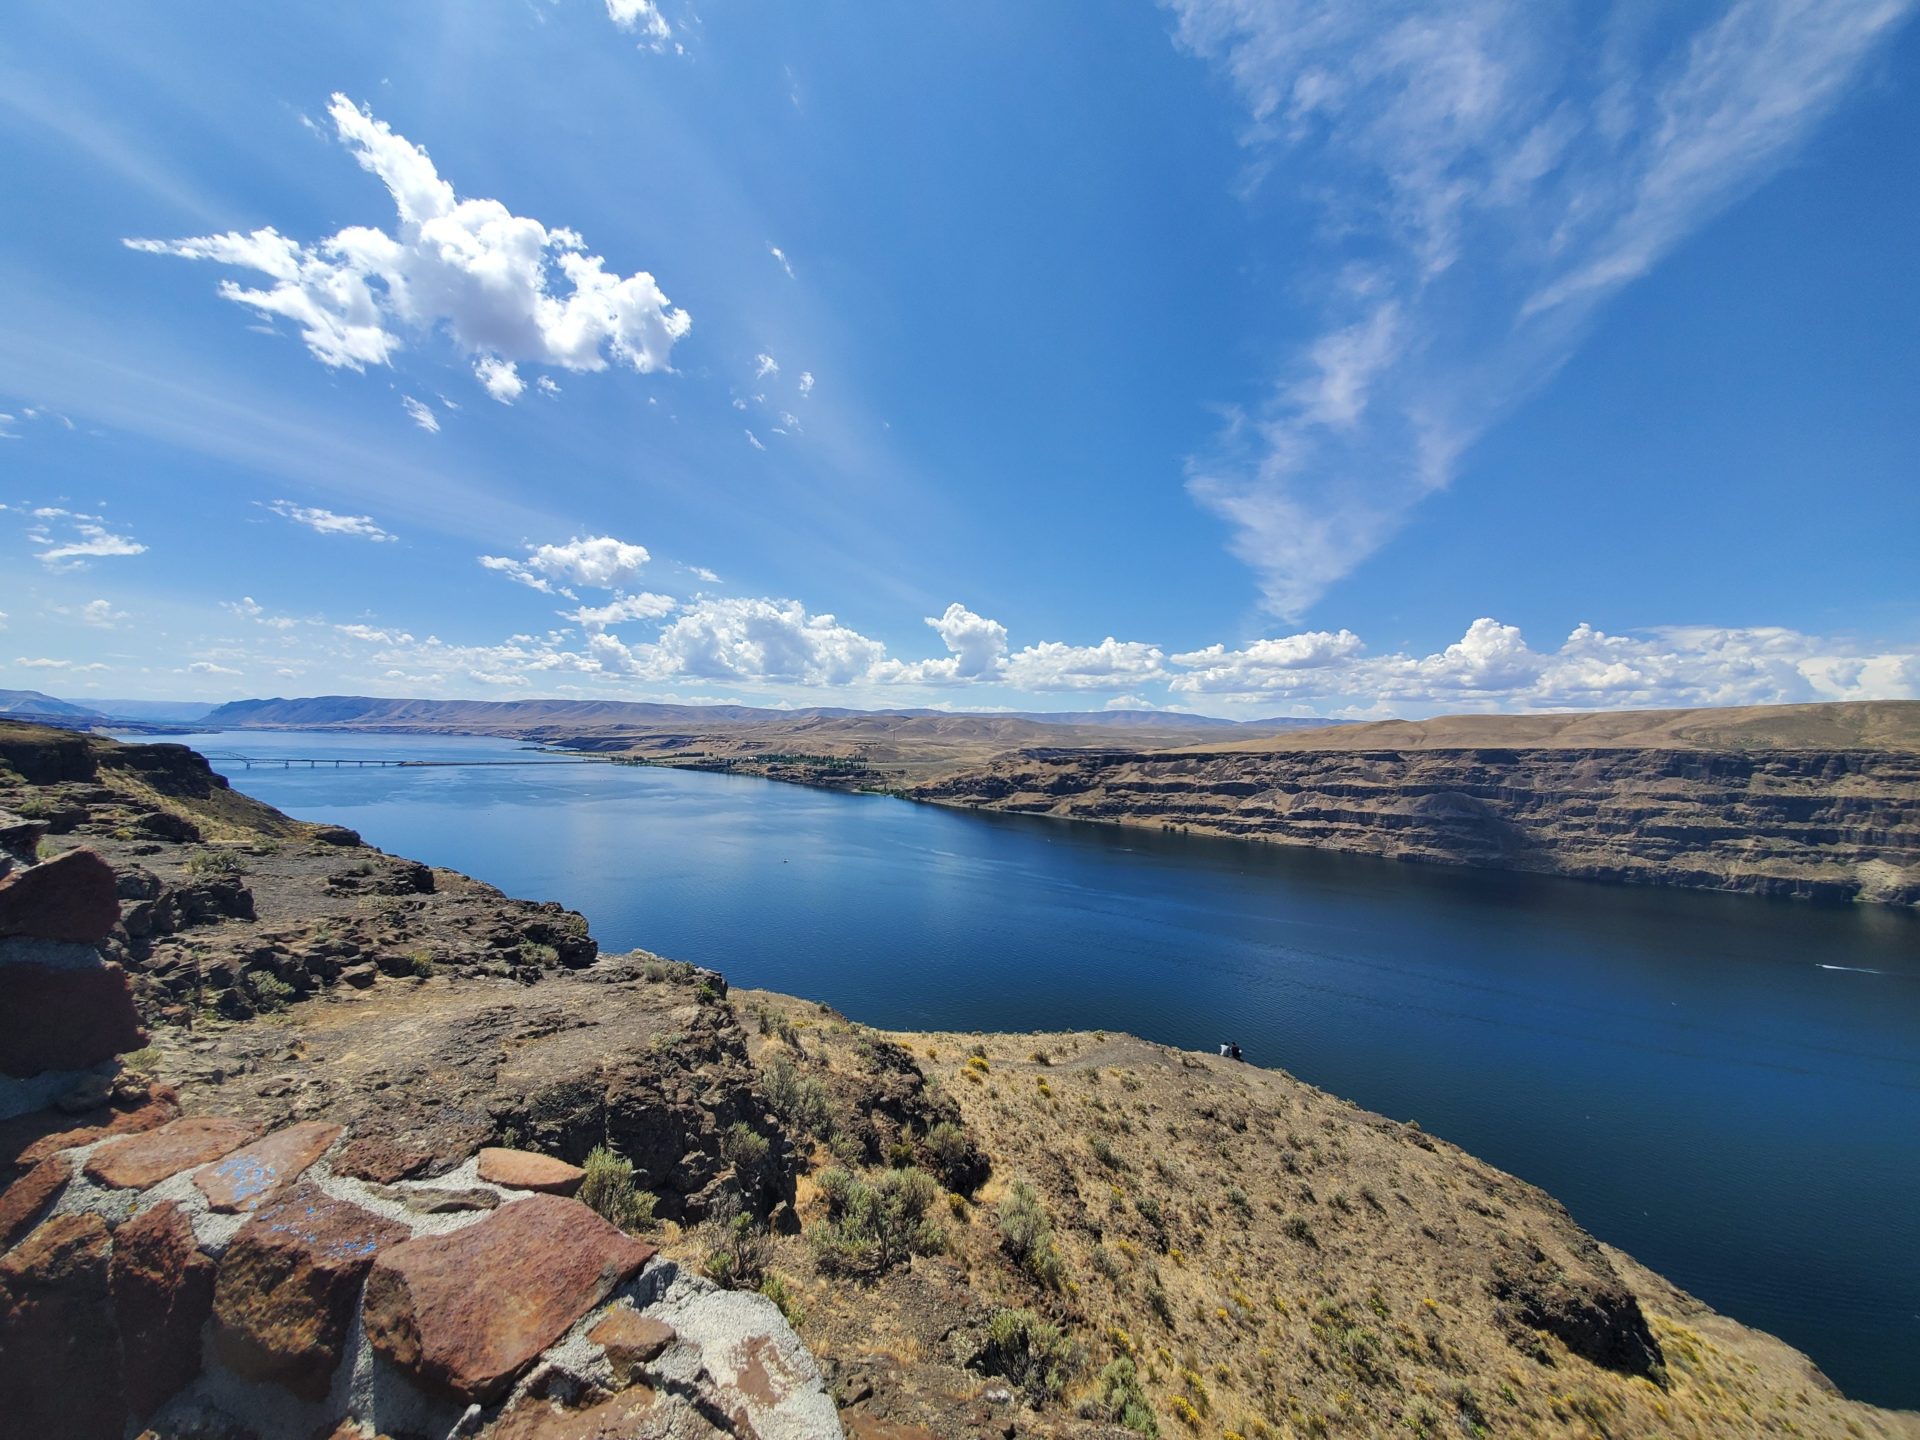 Image of the Columbia River